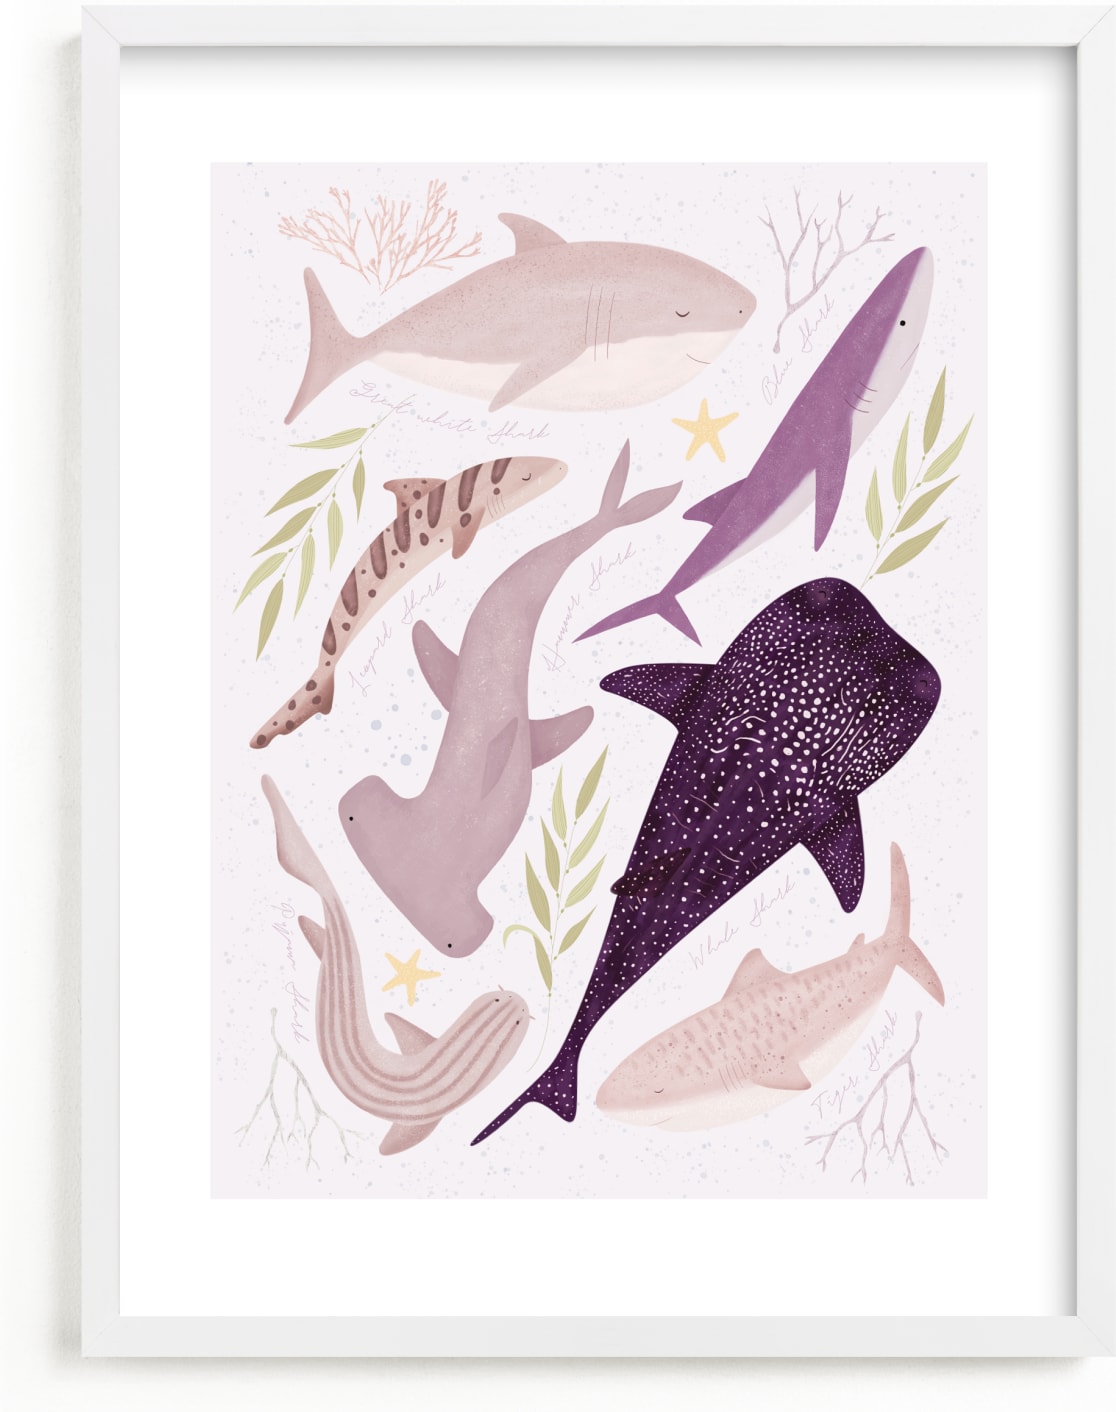 This is a purple art by Sabrin Deirani called Marvelous sharks.